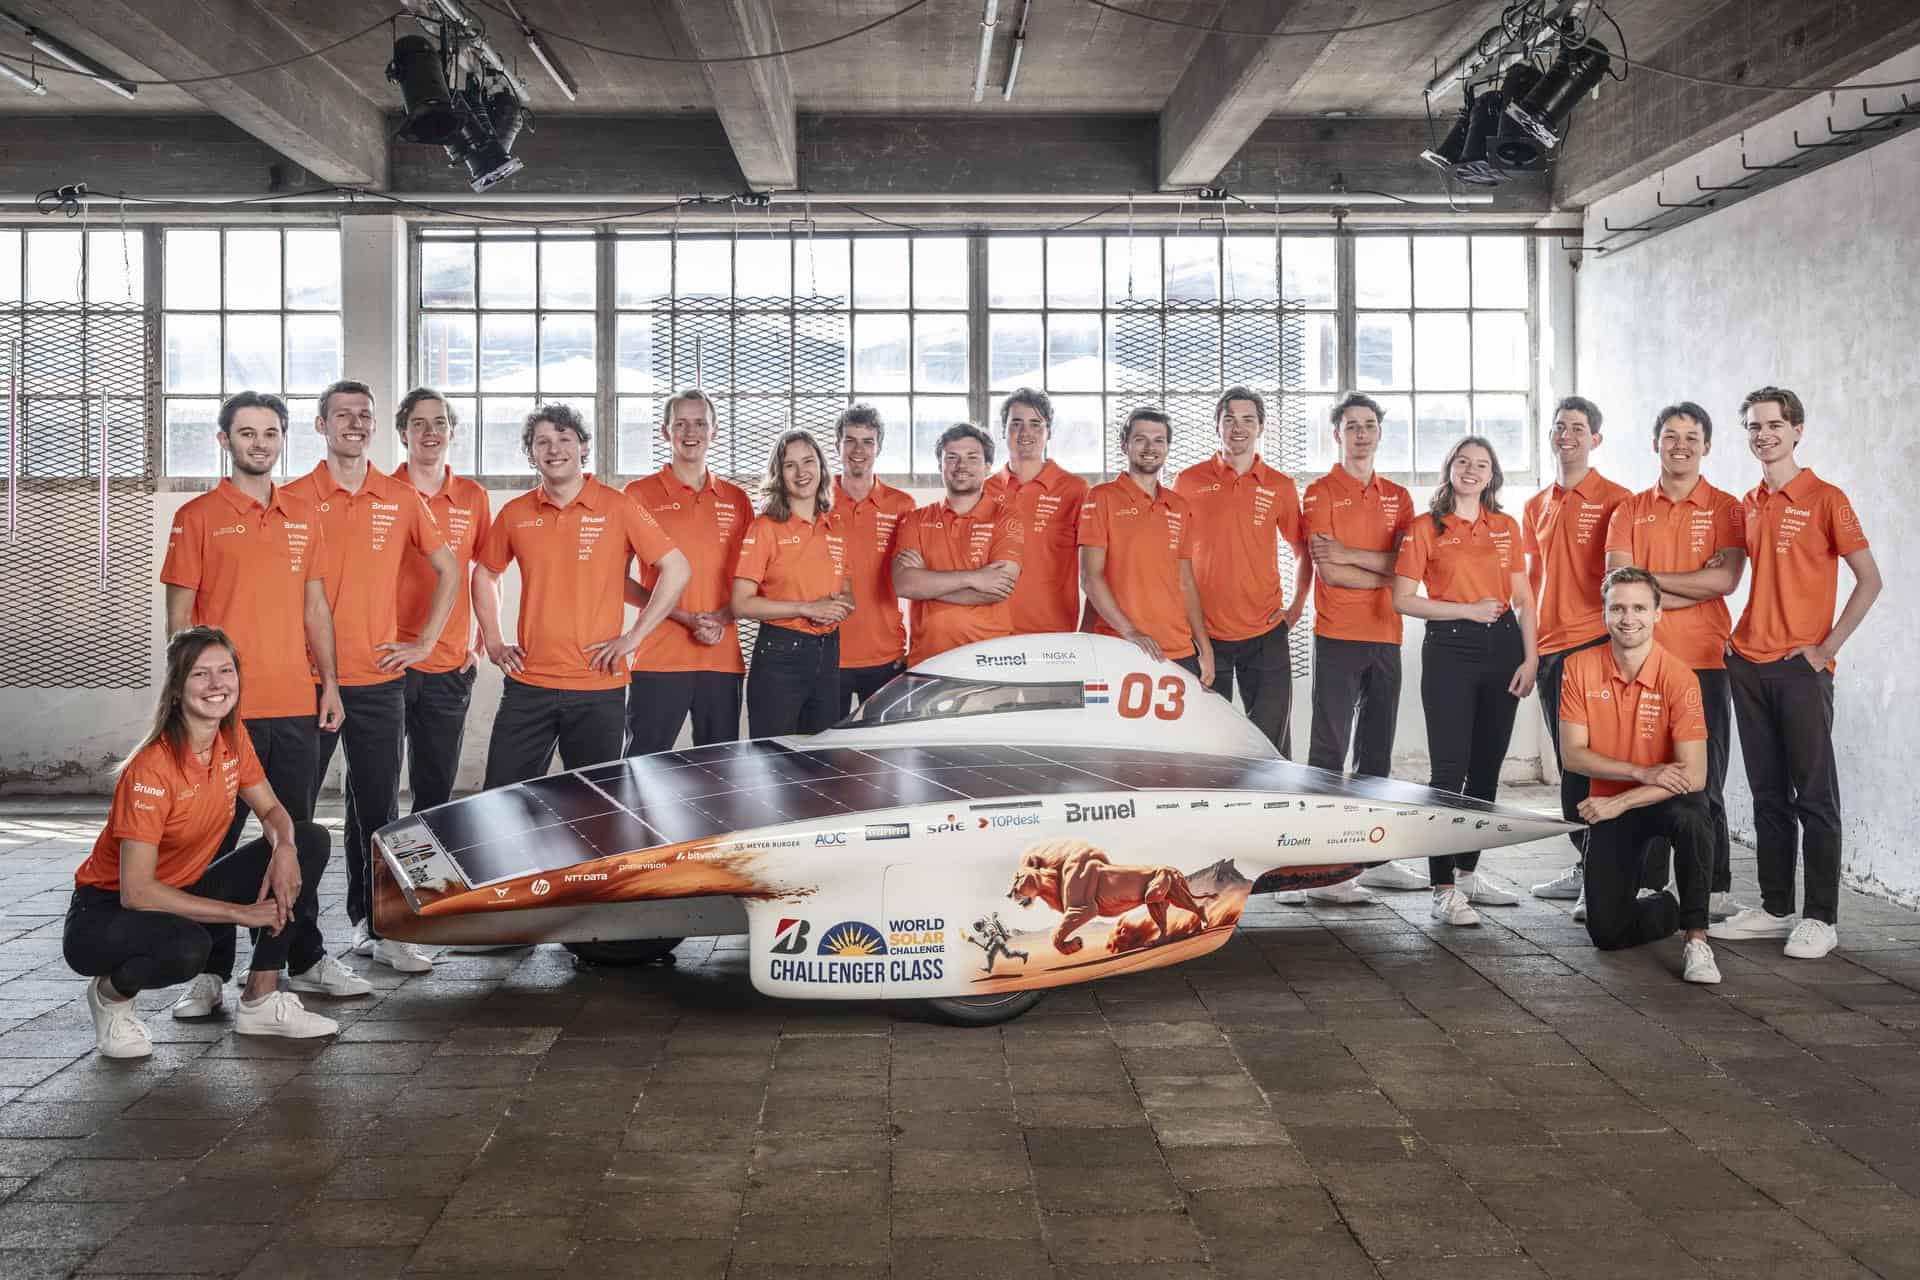 Brunel Solar Team unveils solar car: 'Going to extremes to win back World Cup'